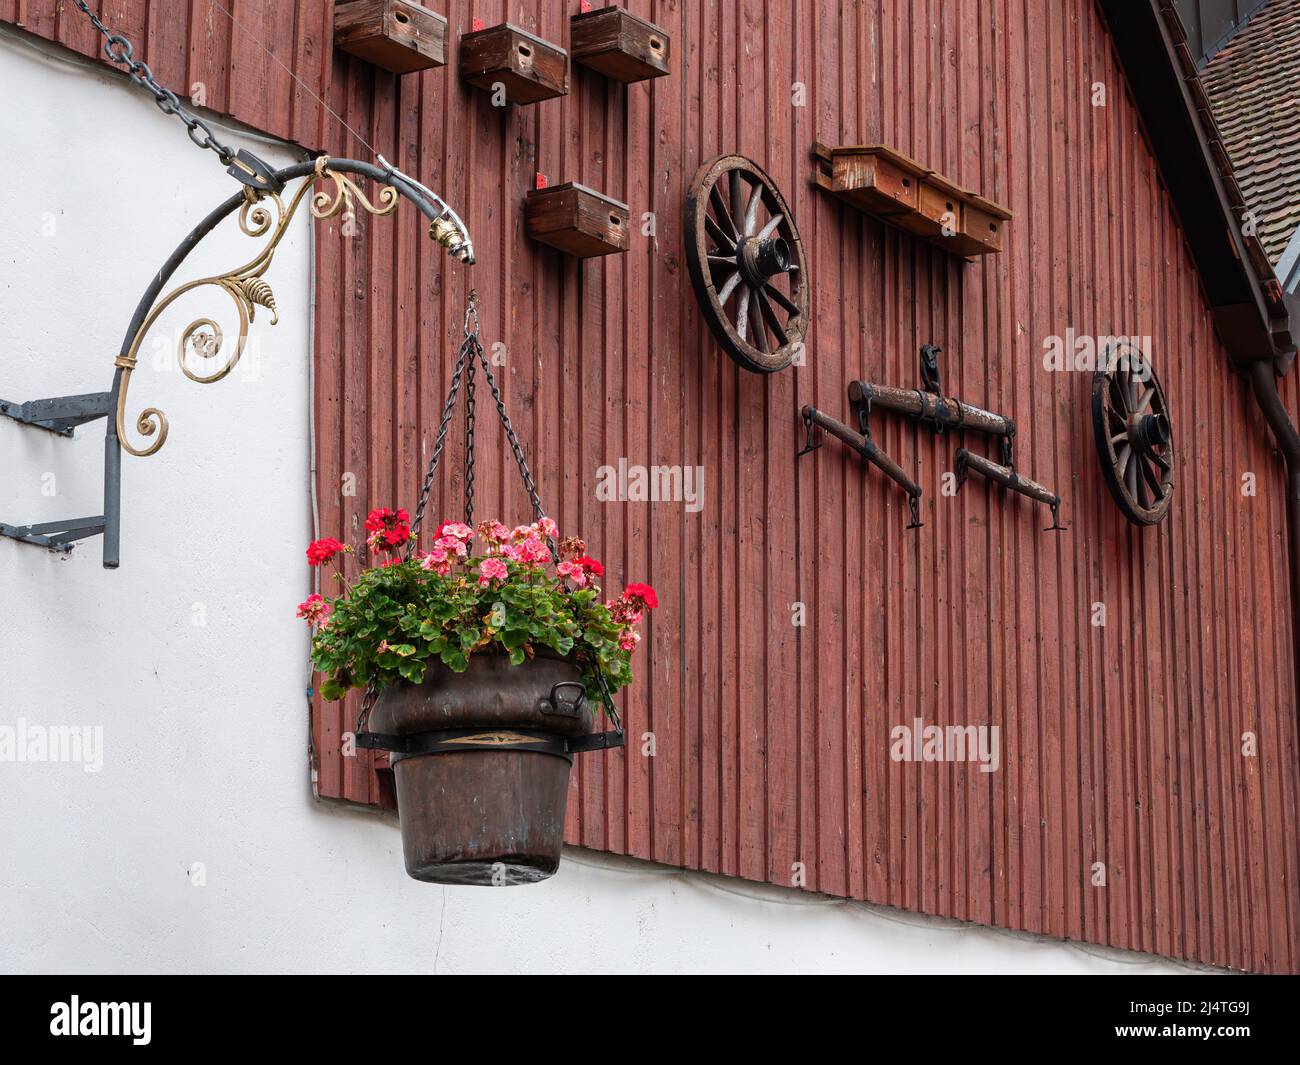 Flower pot, wheels and decorations of an old farmhouse facade in Laufen, Switzerland Stock Photo